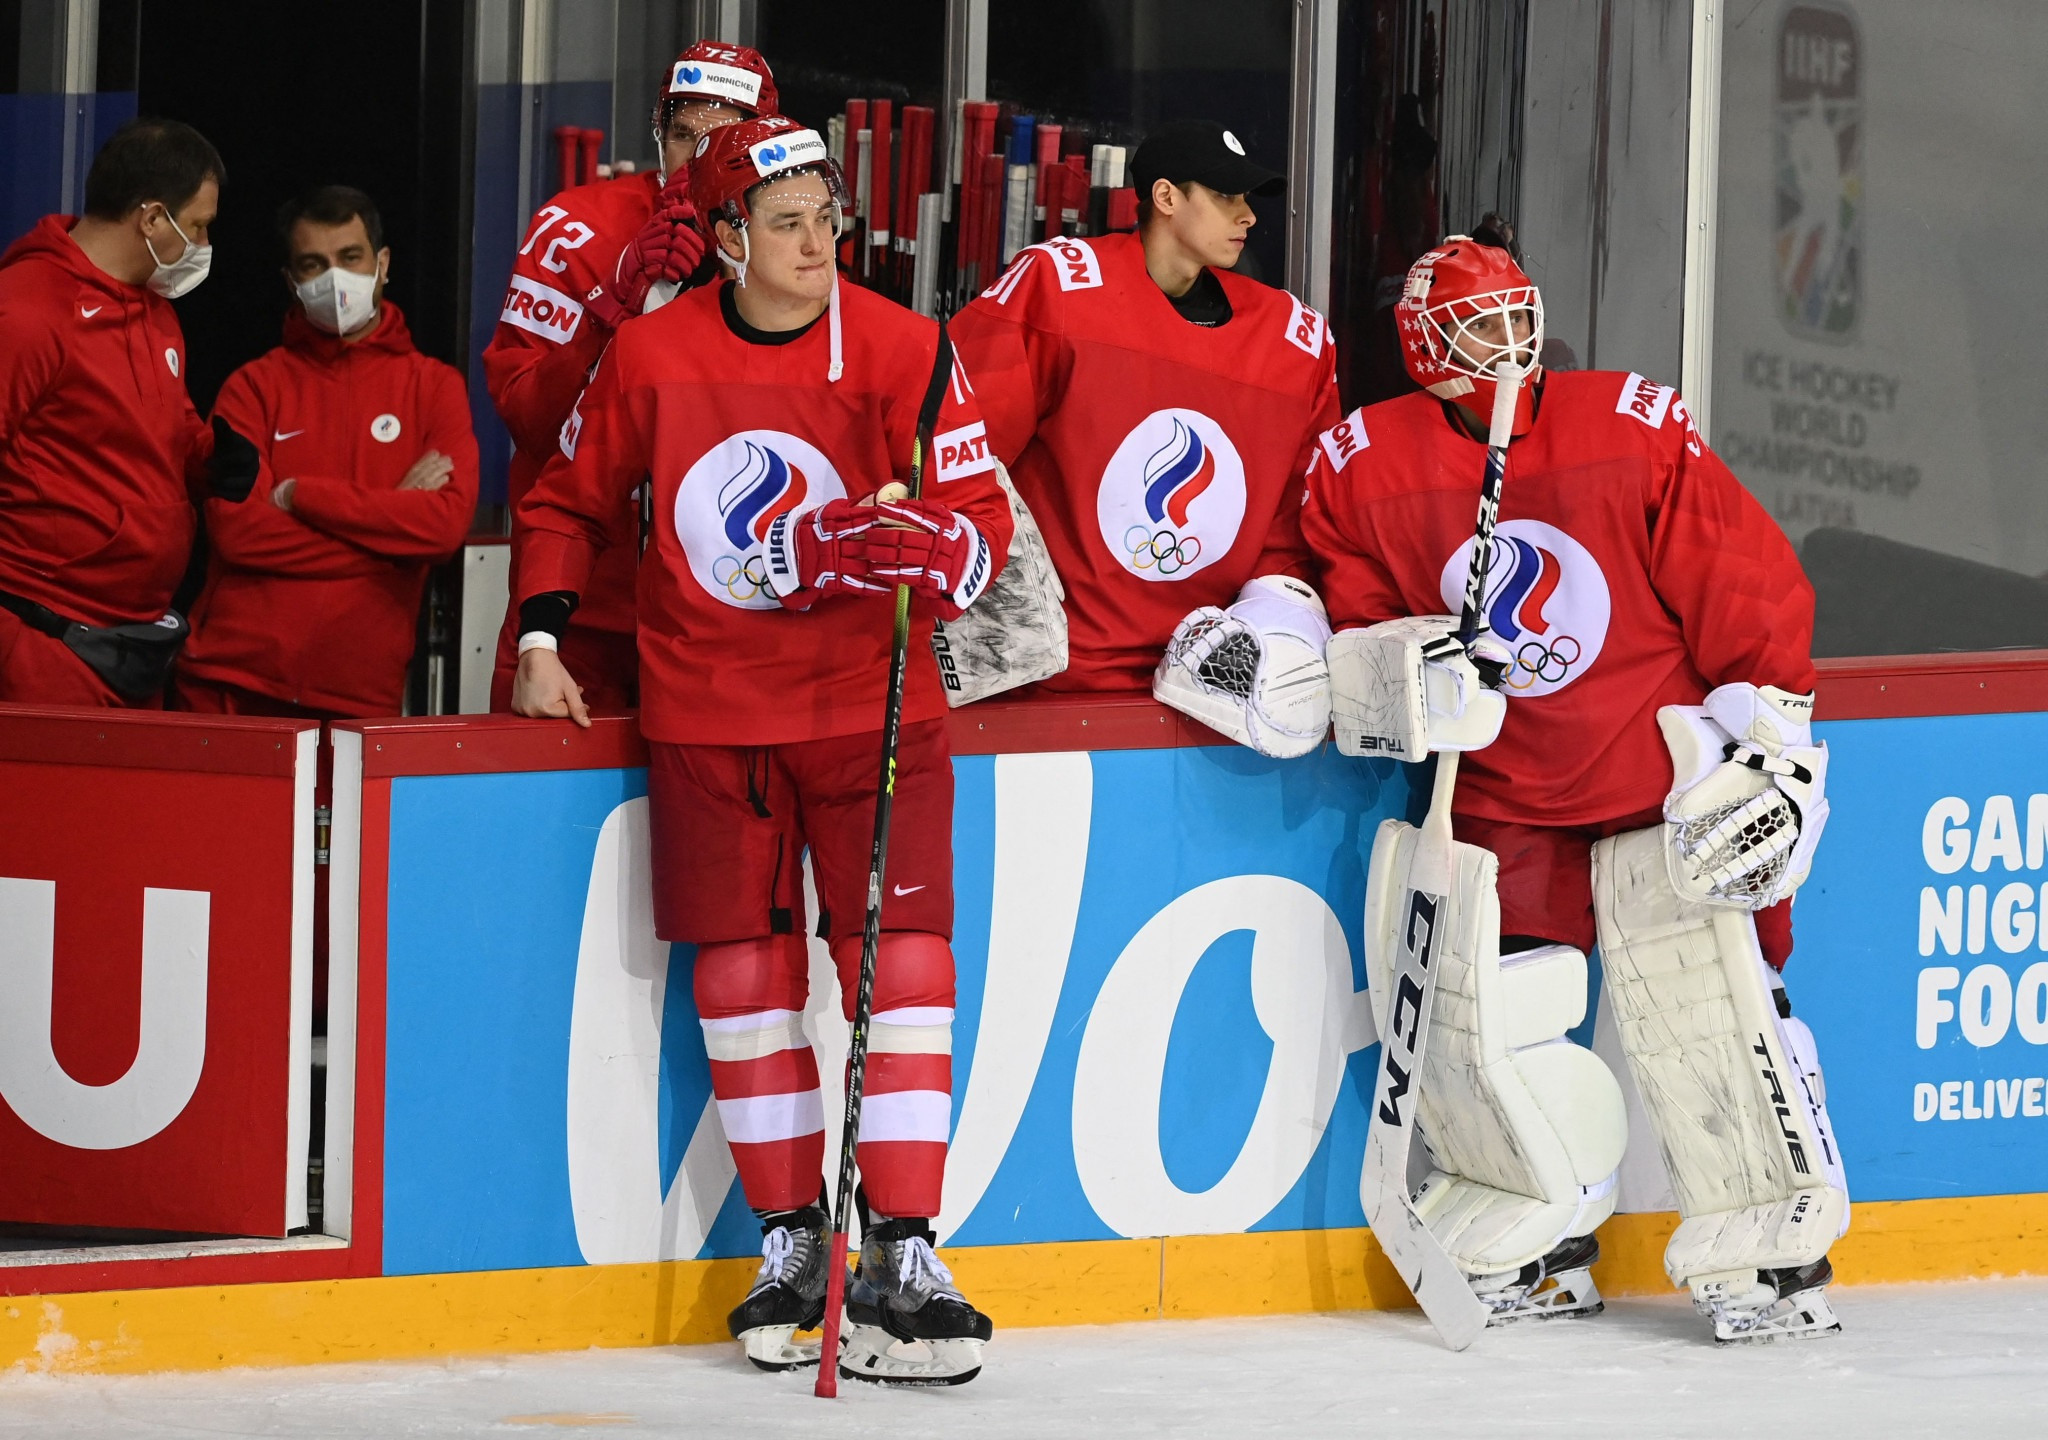 Russia and Belarus had their IIHF World Championship participation 